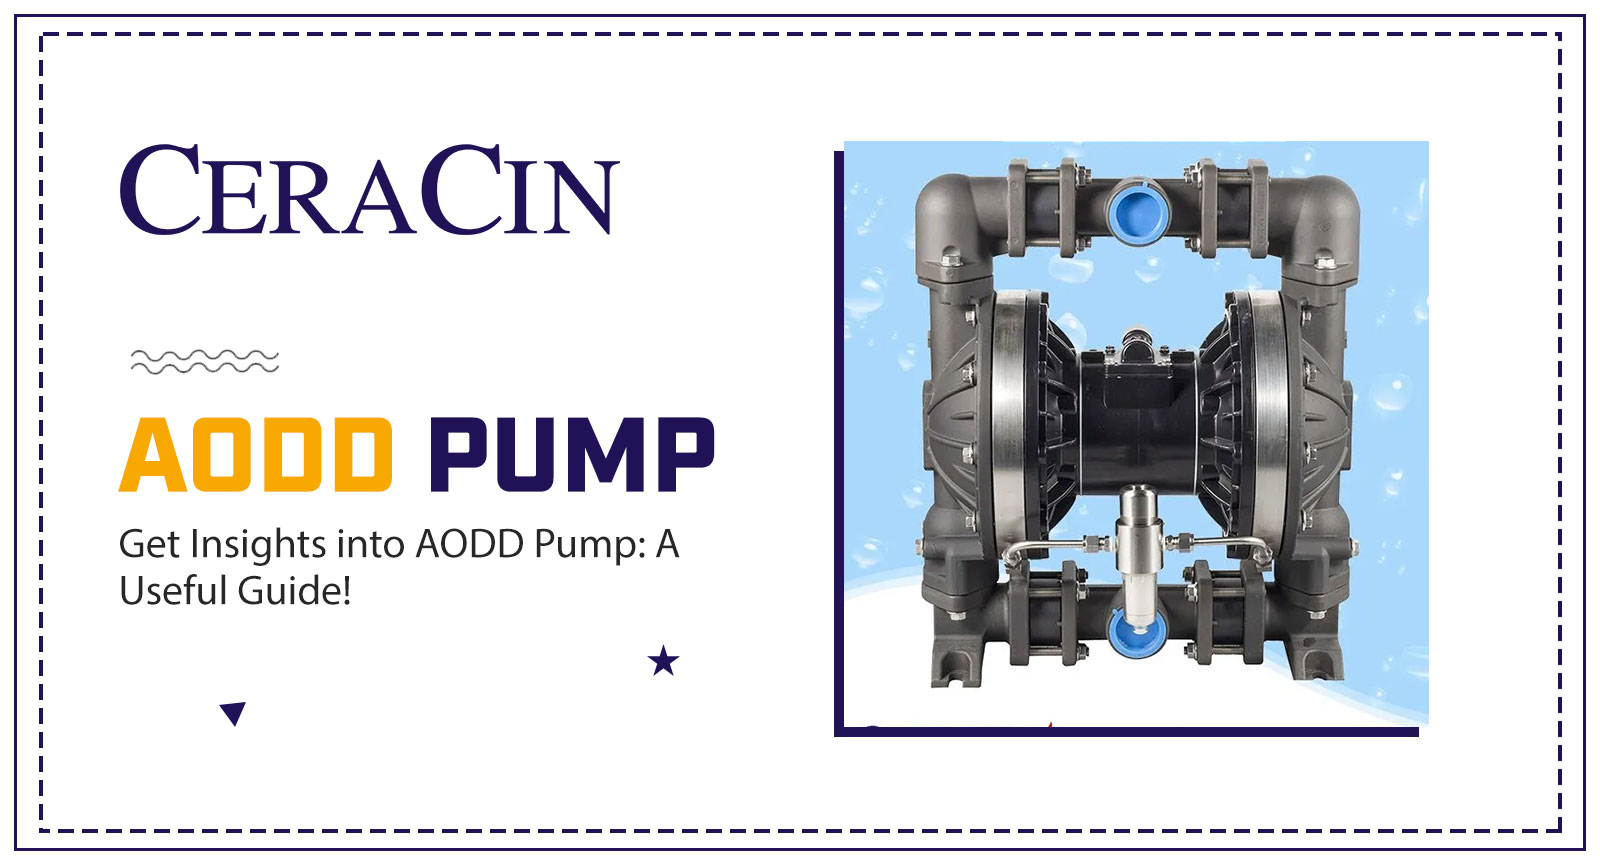  Get Insights into AODD Pump: A Useful Guide!